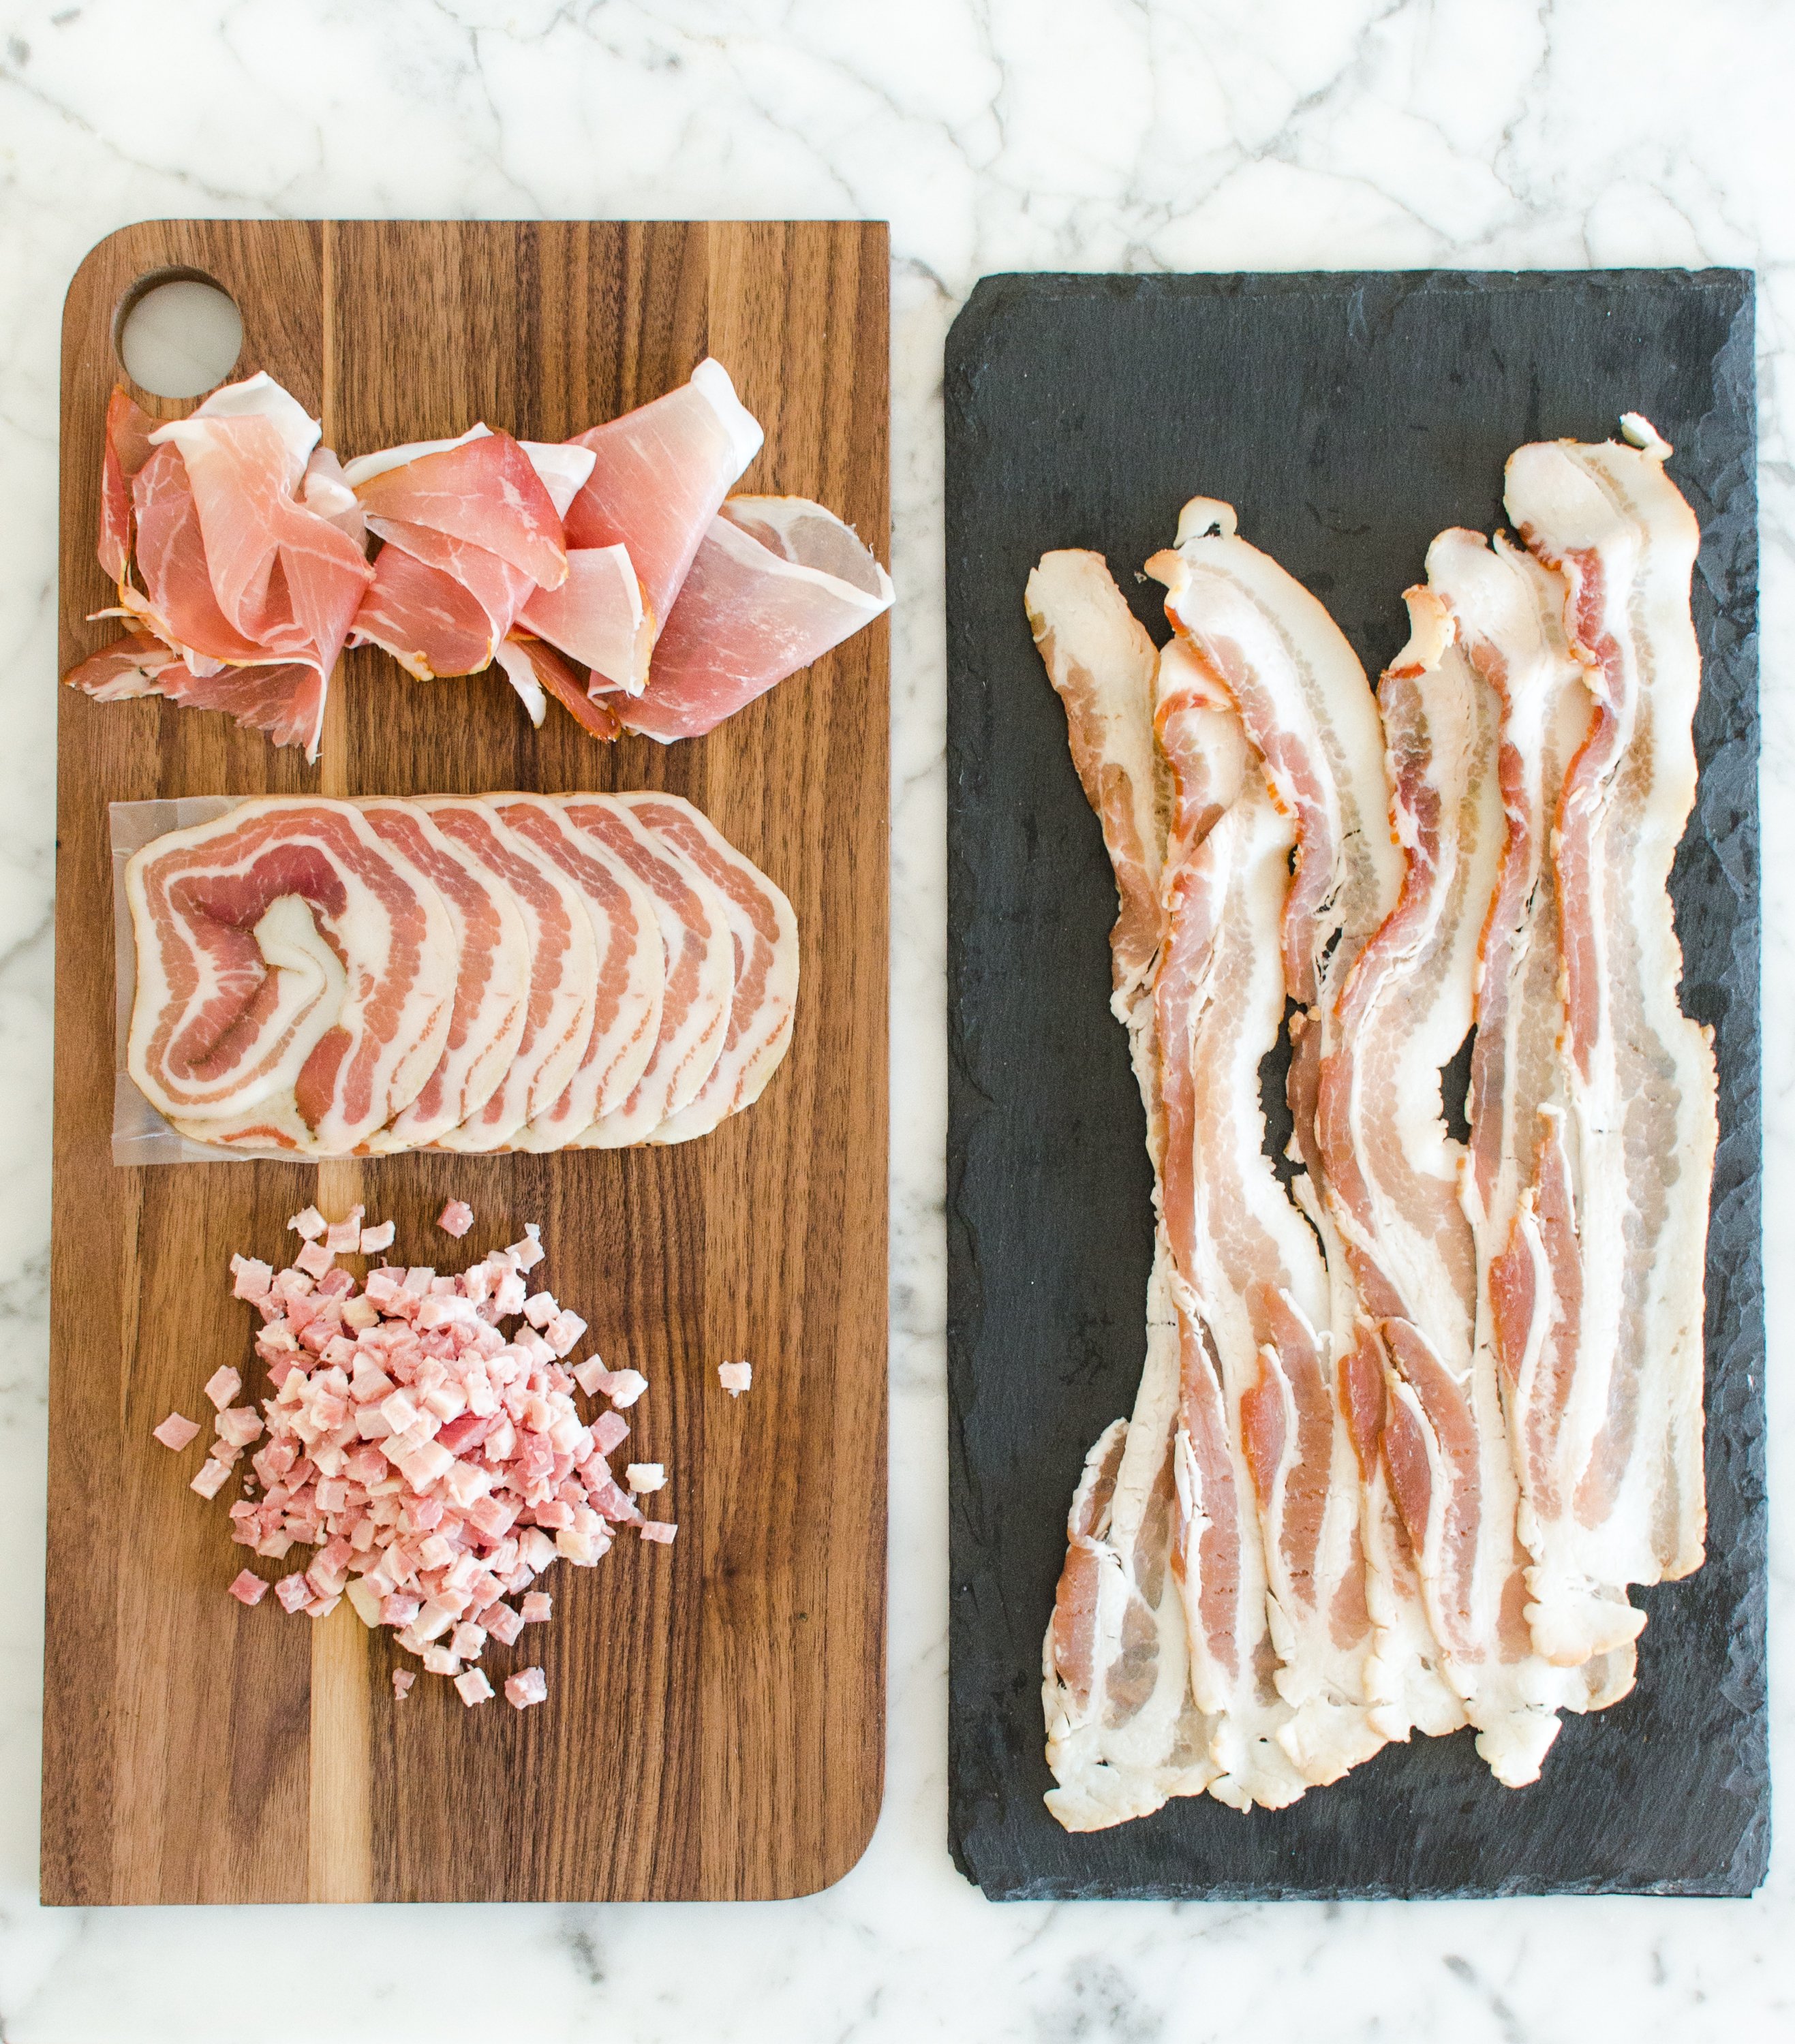 What do Italians use instead of pancetta?